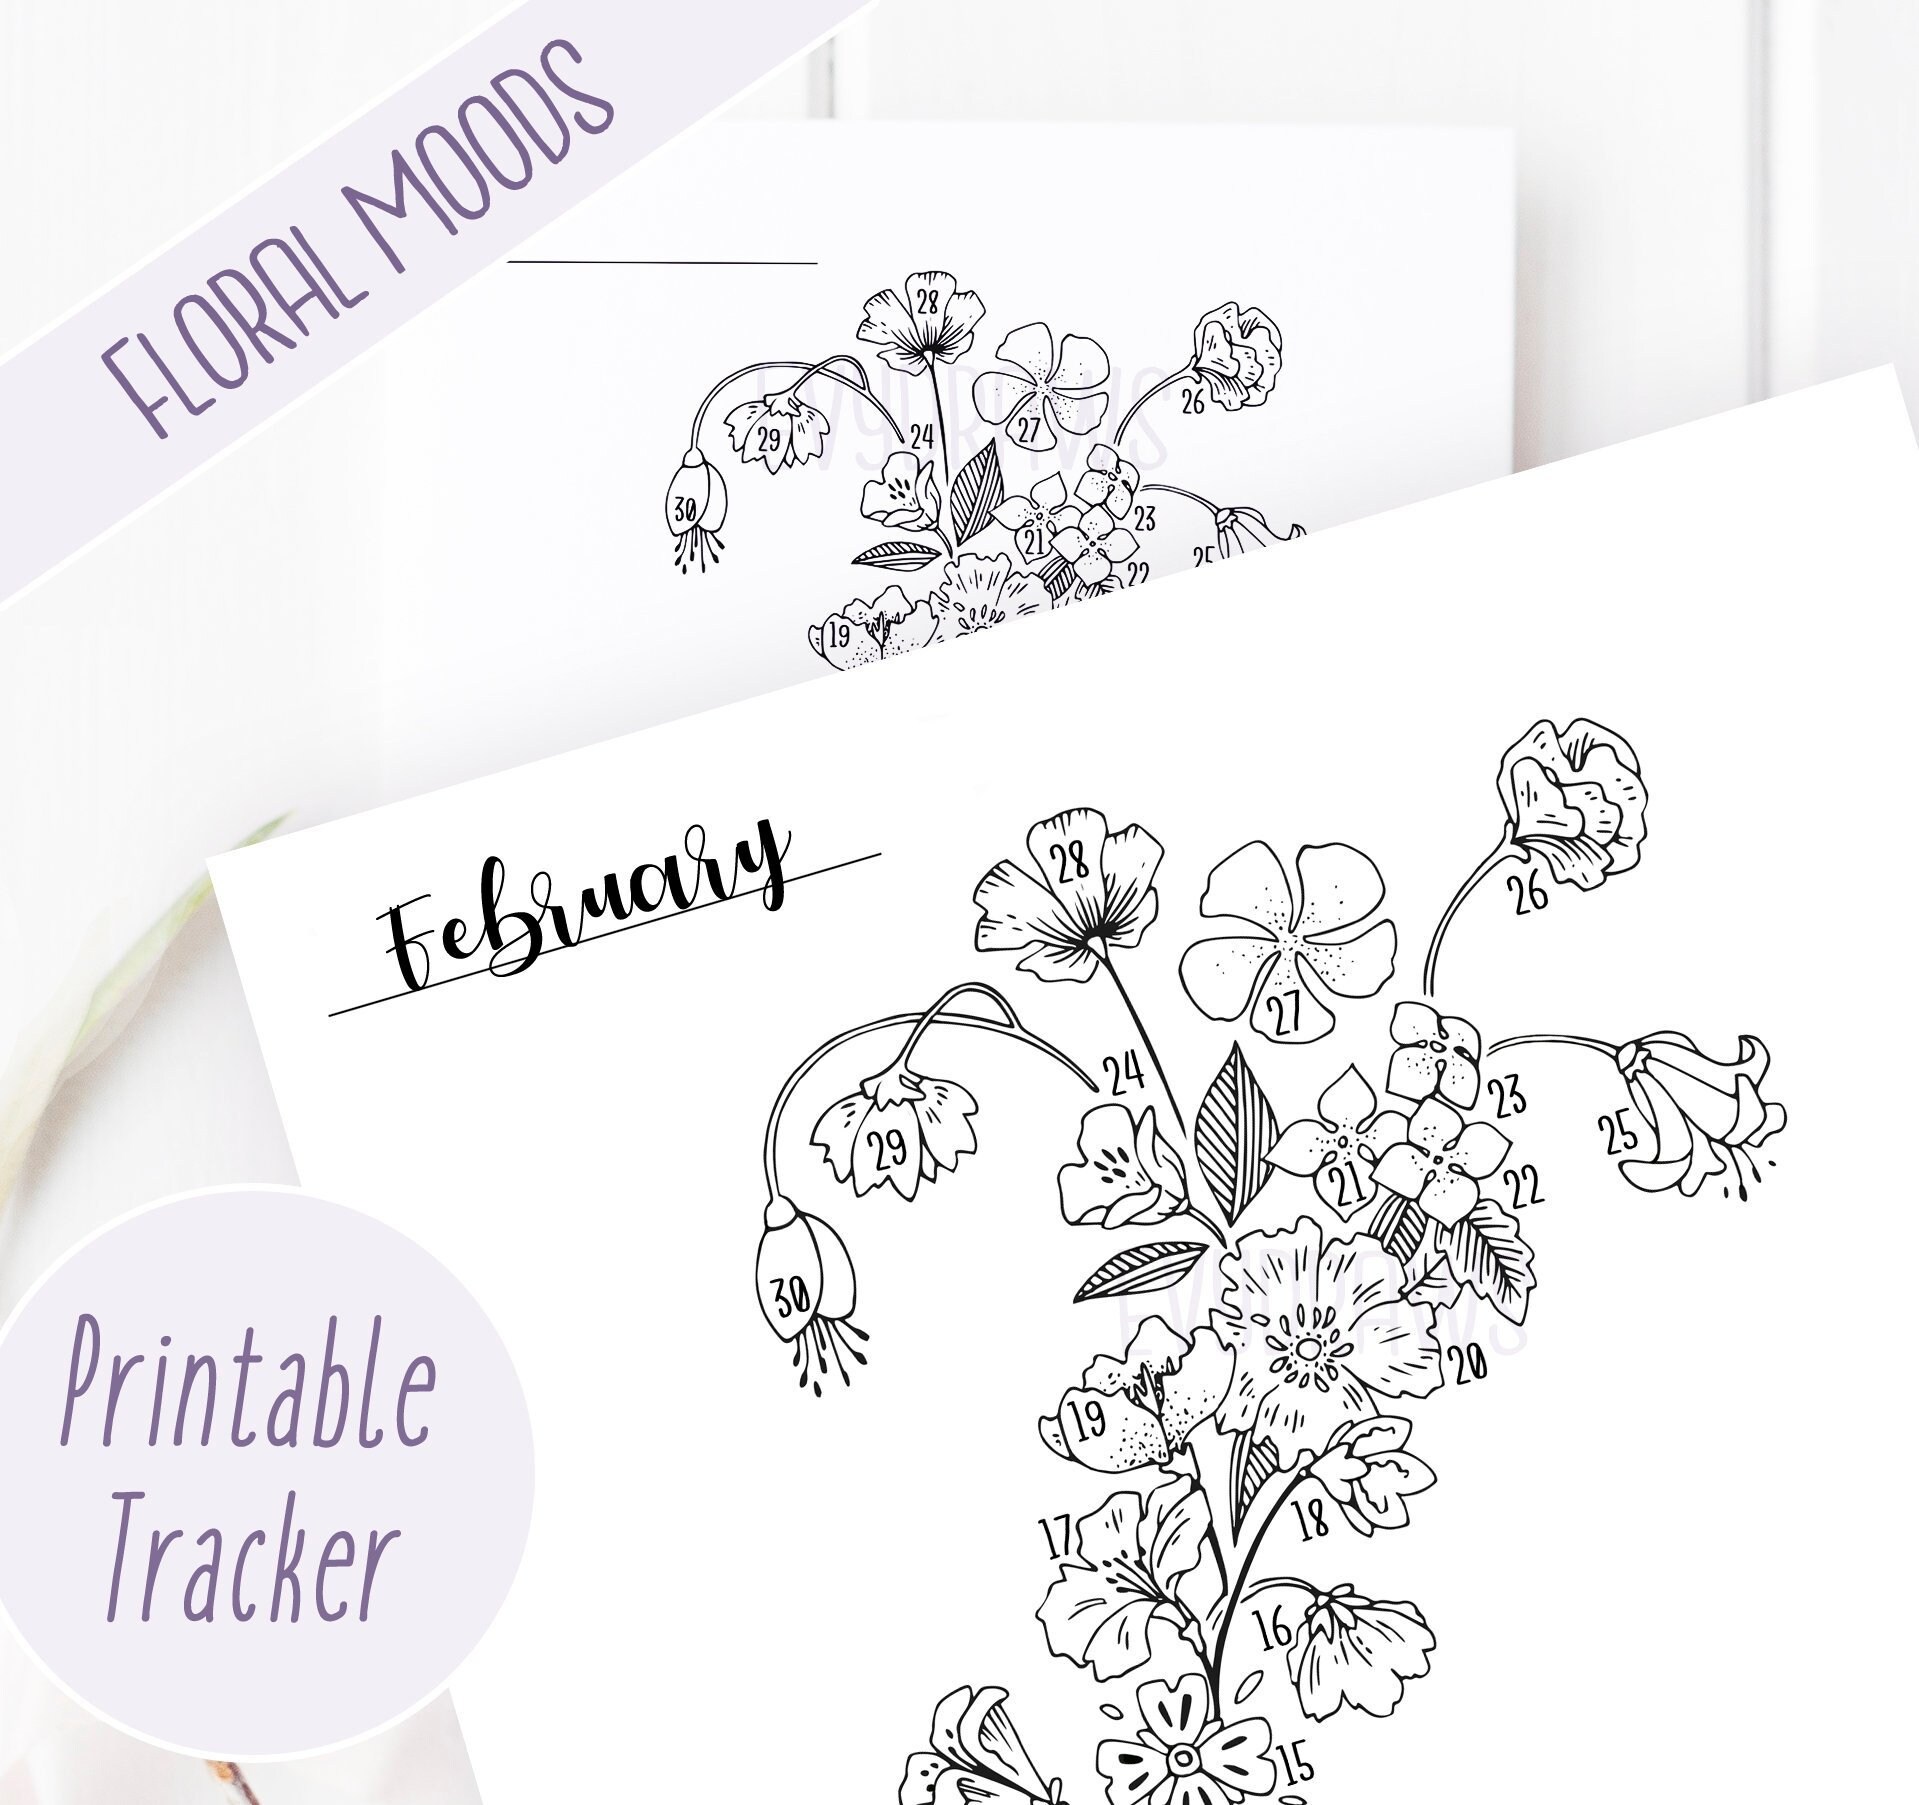 A Floral Mood Tracker For Your Journal – Kelly Creates